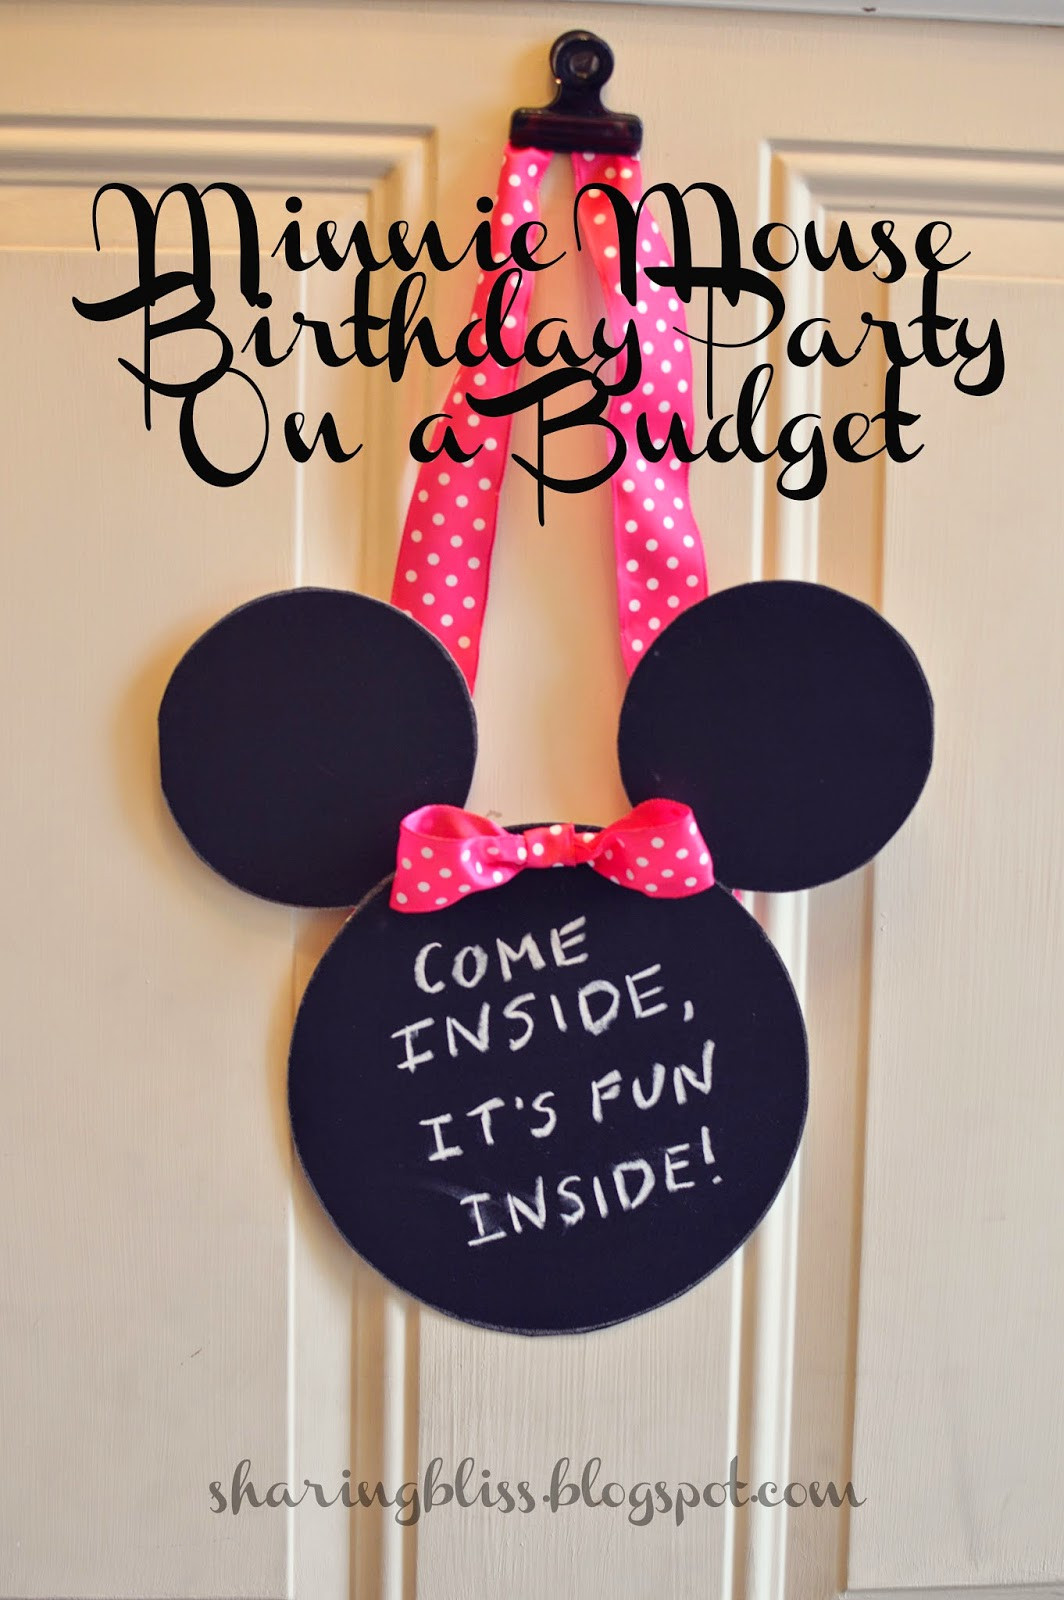 Minnie Mouse Birthday Party Decoration Ideas
 Minnie Mouse Birthday Party on a Bud